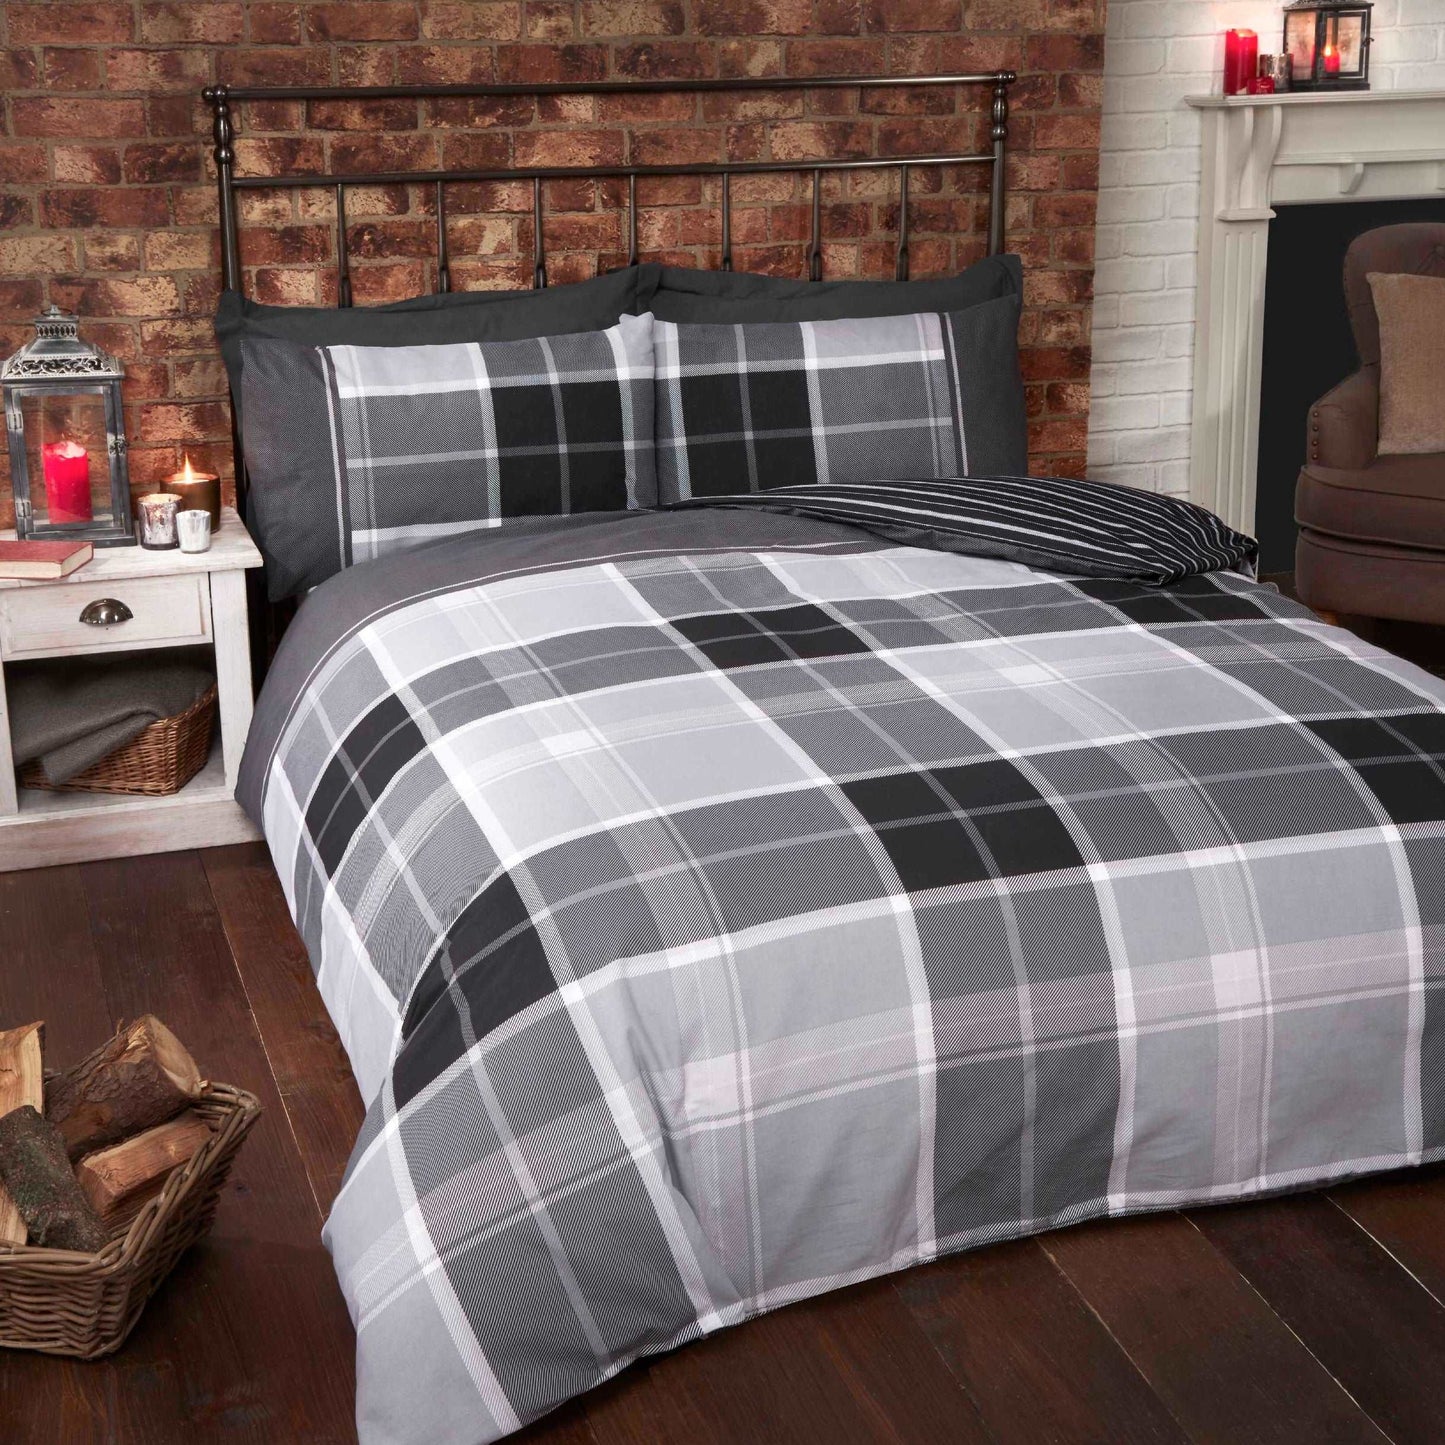 A very on trend tartan checked print duvet set available in 3 beautiful colourways. The reverse of the duvet cover carries a striped design in contrasting colours to give your room a different look and feel. This beautifully designed bedding range is simply gorgeous and creates an overall look that is pleasingly sophisticated